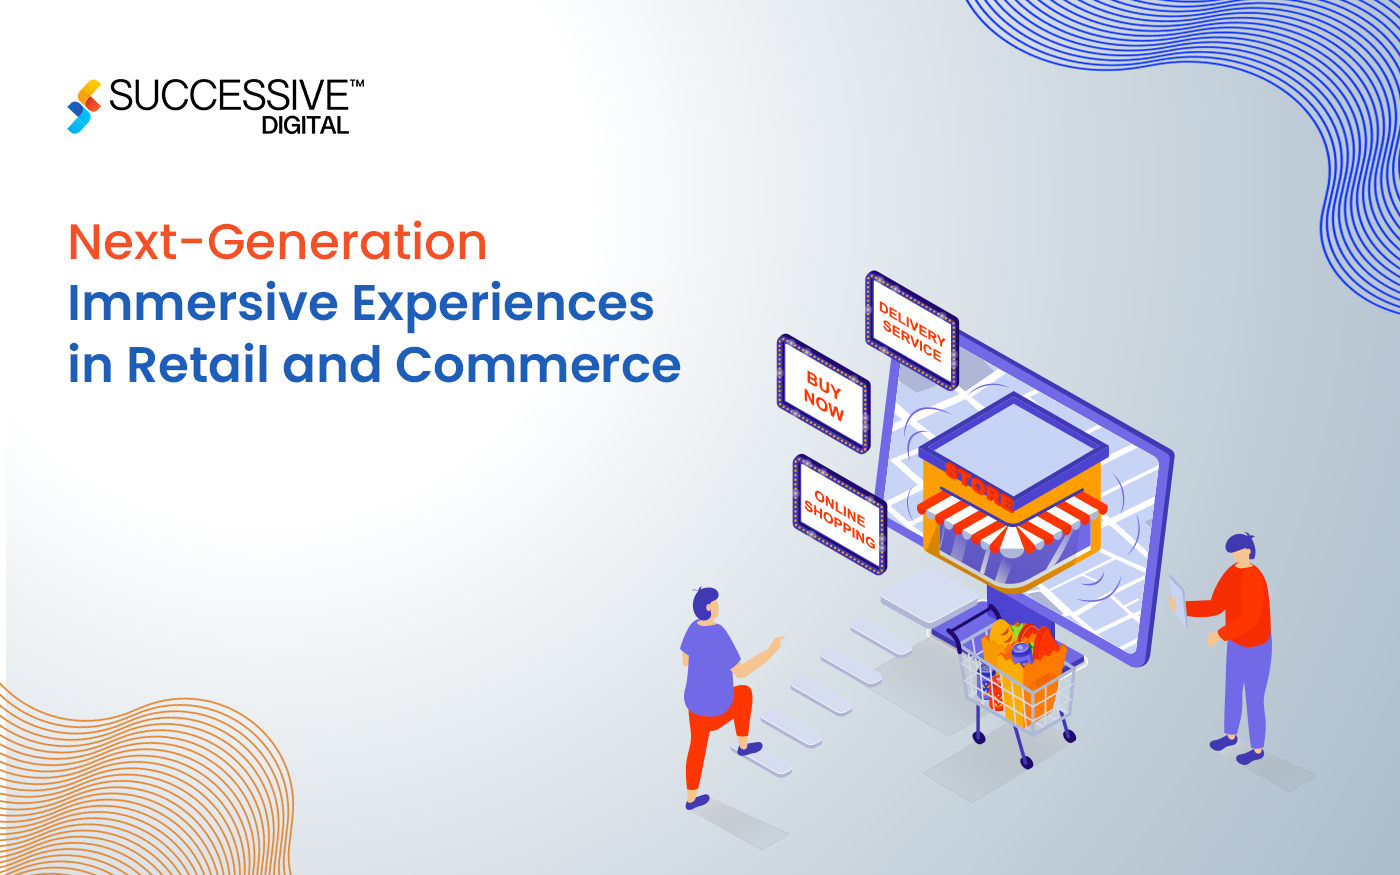 Next-Generation Immersive Experiences in Retail and Commerce